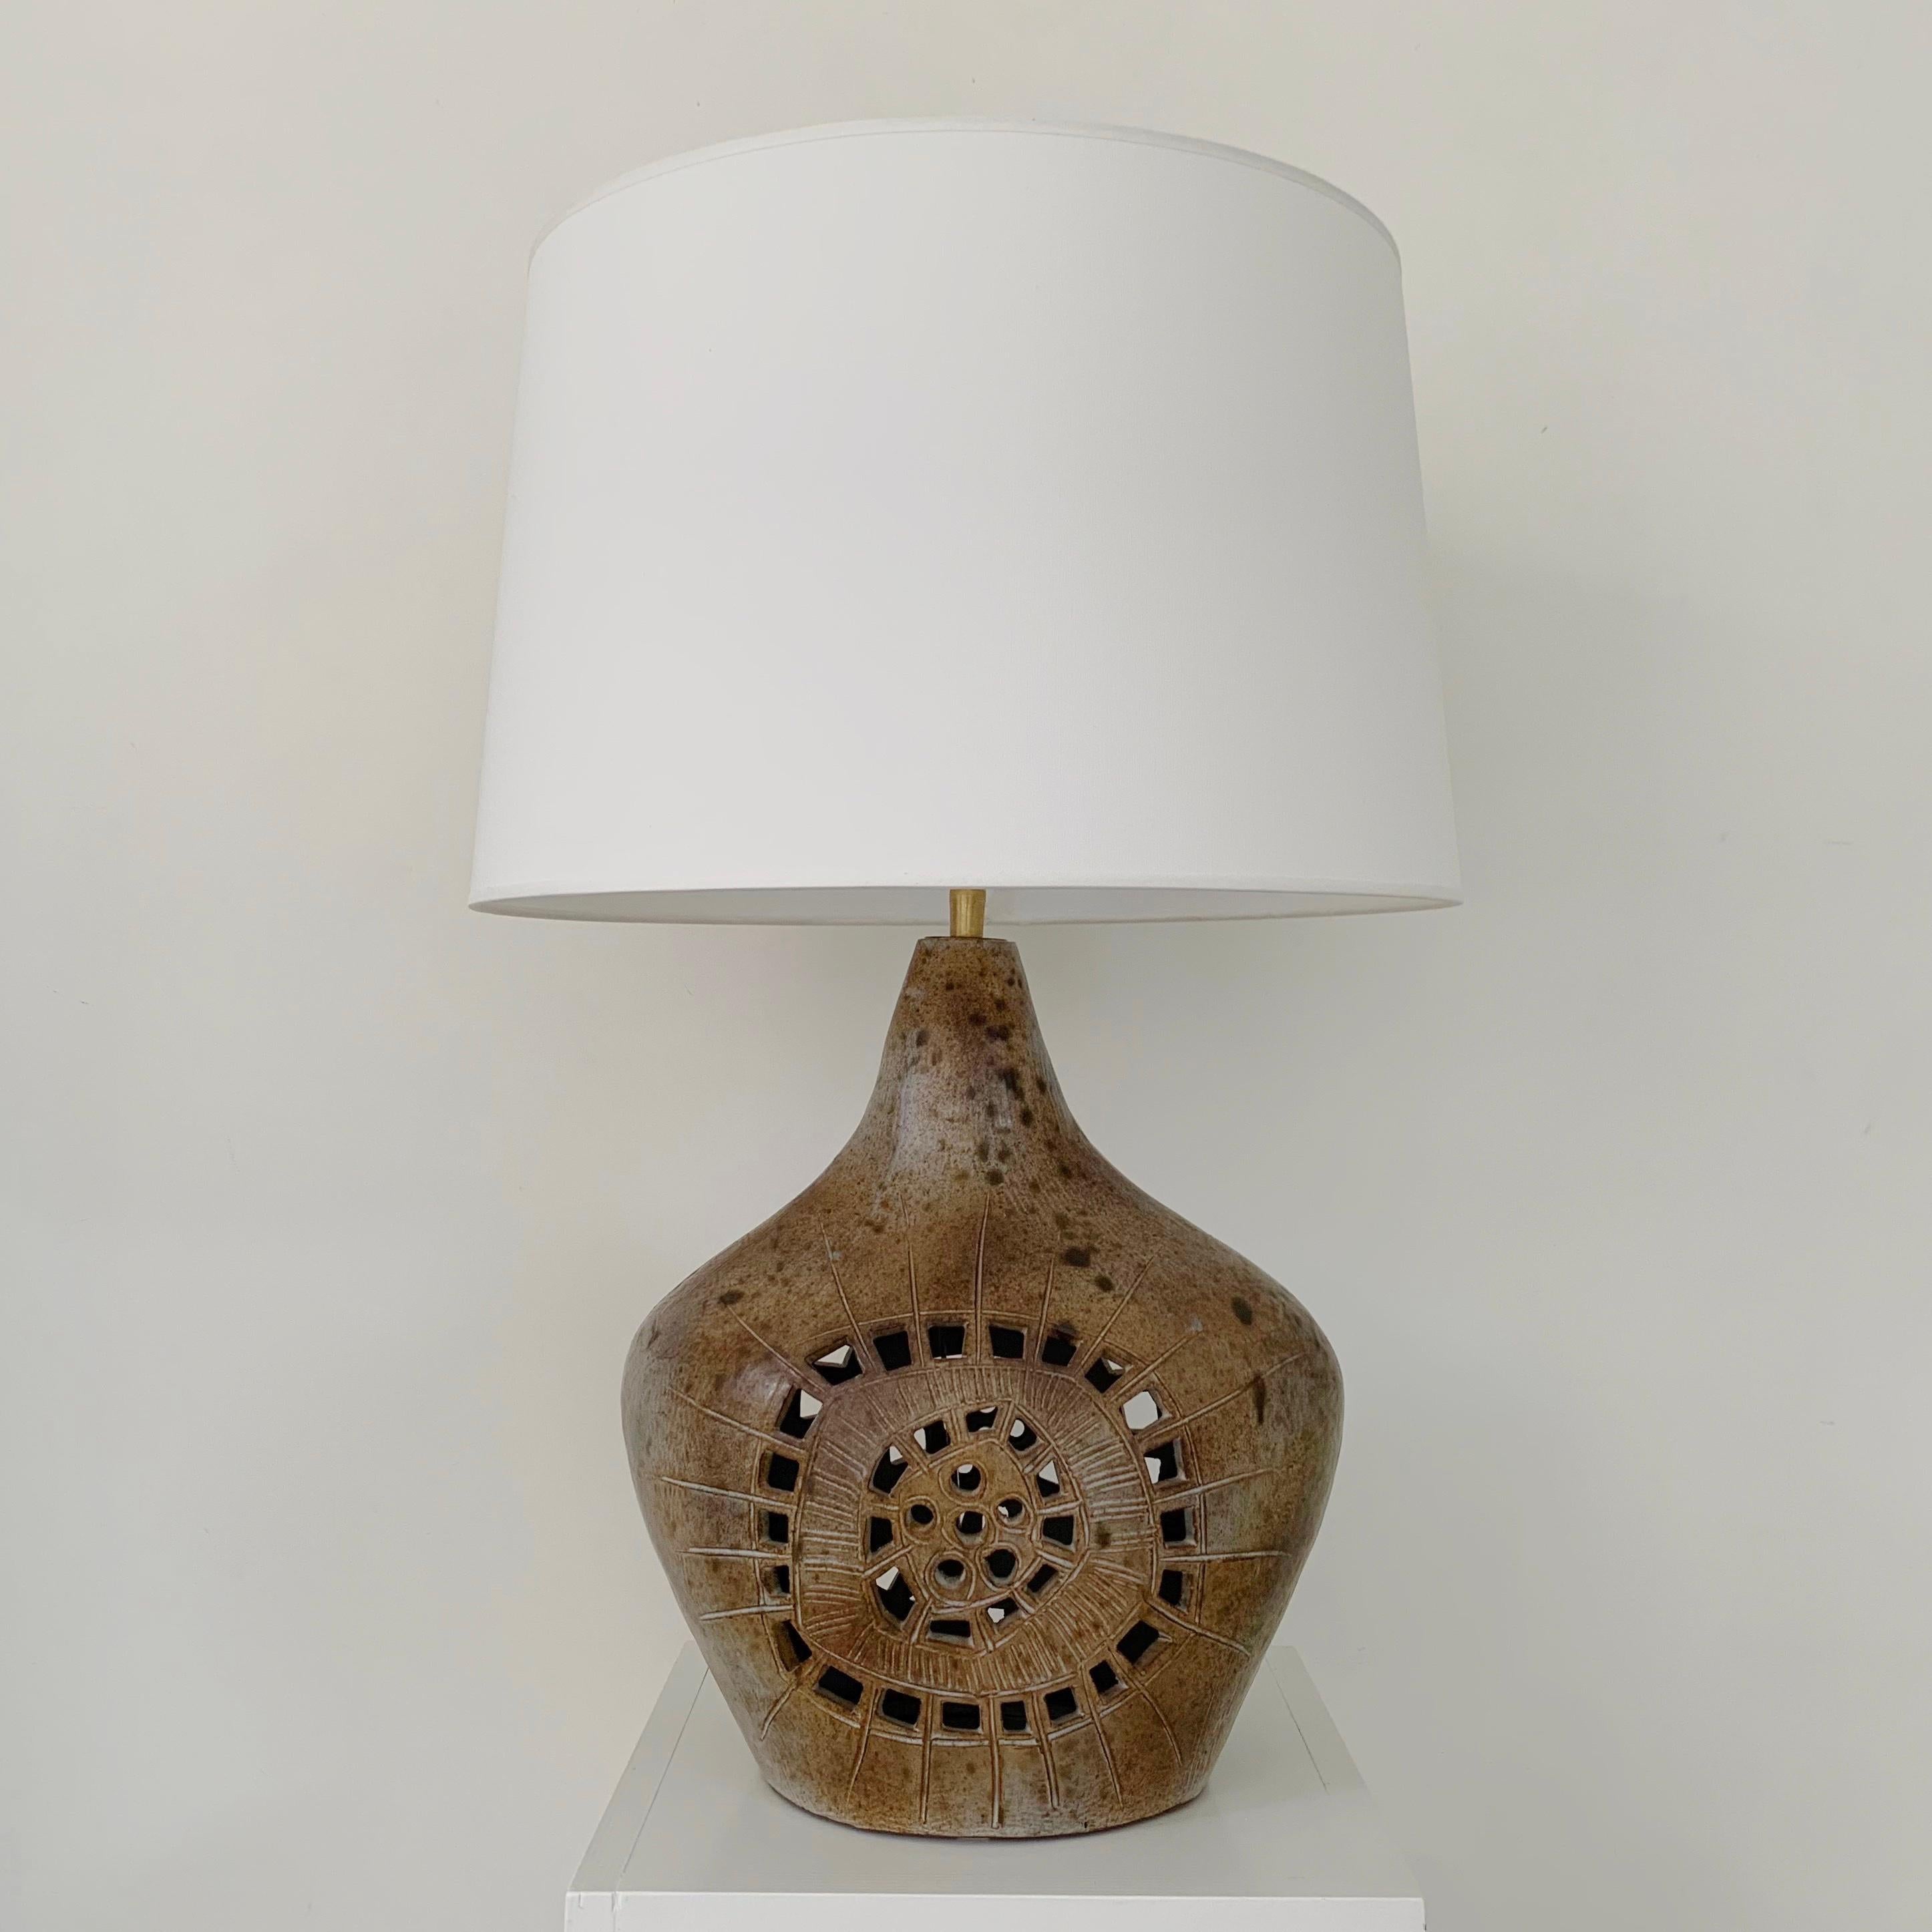 Beautiful Agnes Escala ceramic table lamp, circa 1970, France.
Incised stoneware, new fabric shade.
2 lights, rewired.
Dimensions: 61 cm total height, diameter of the shade: 40 cm. Height of the ceramic alone: 35 cm.
All purchases are covered by our